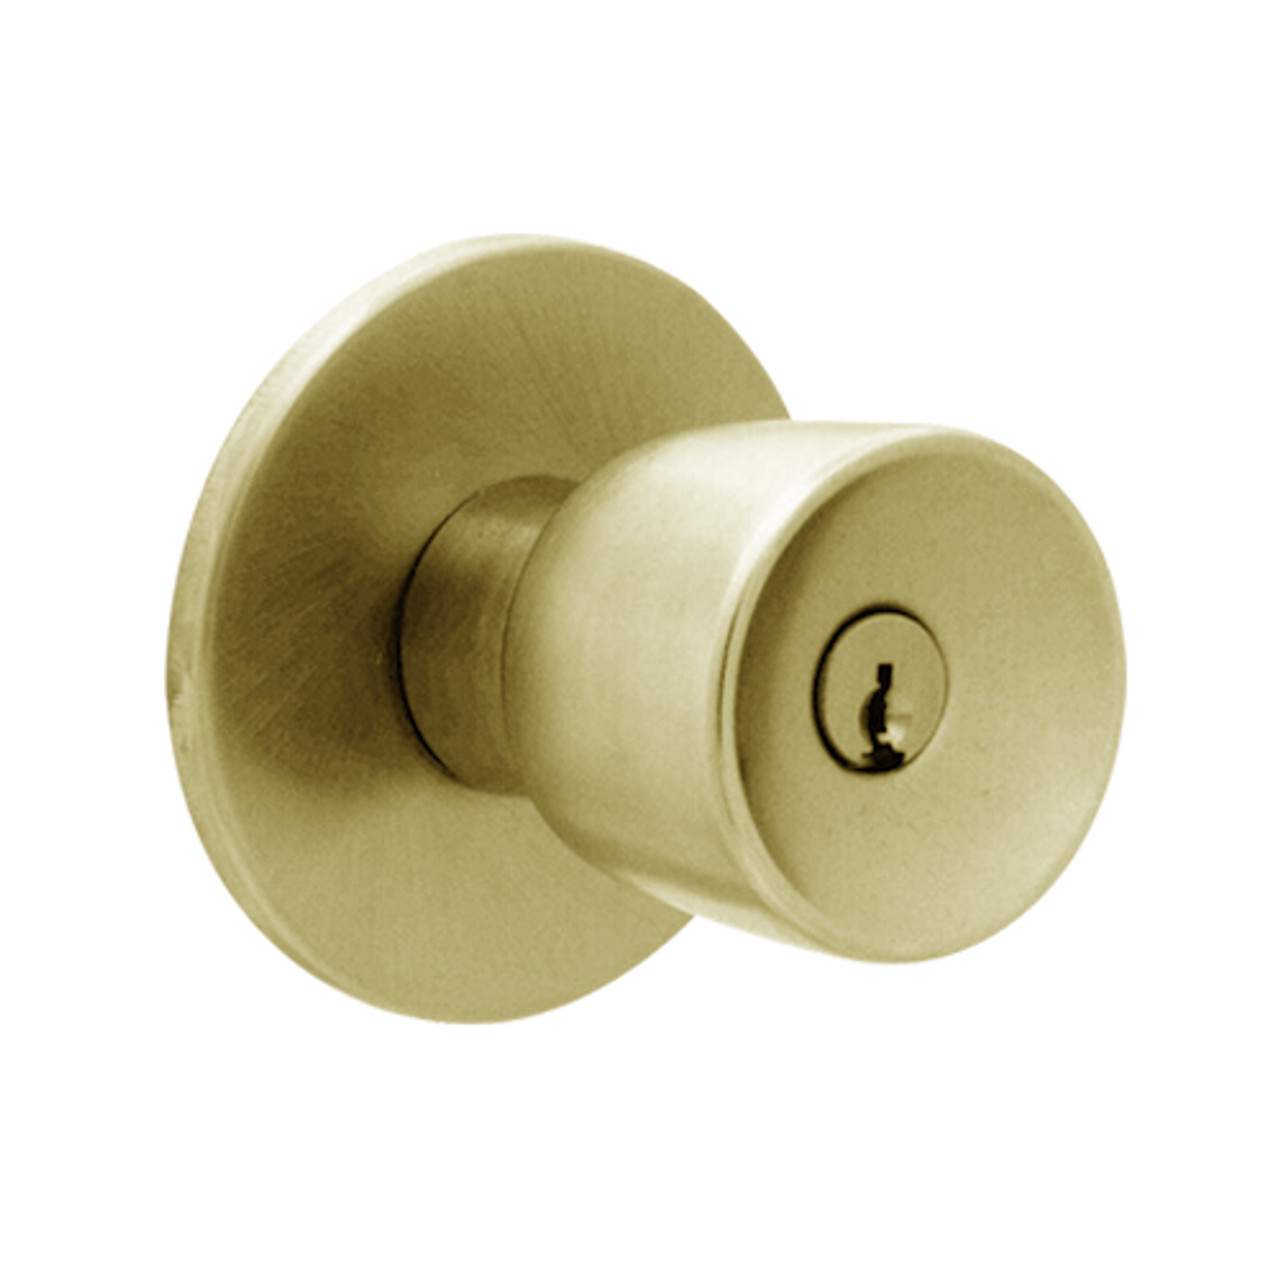 X501PD-EY-606 Falcon X Series Cylindrical Entry Lock with Elite-York Knob Style in Satin Brass Finish